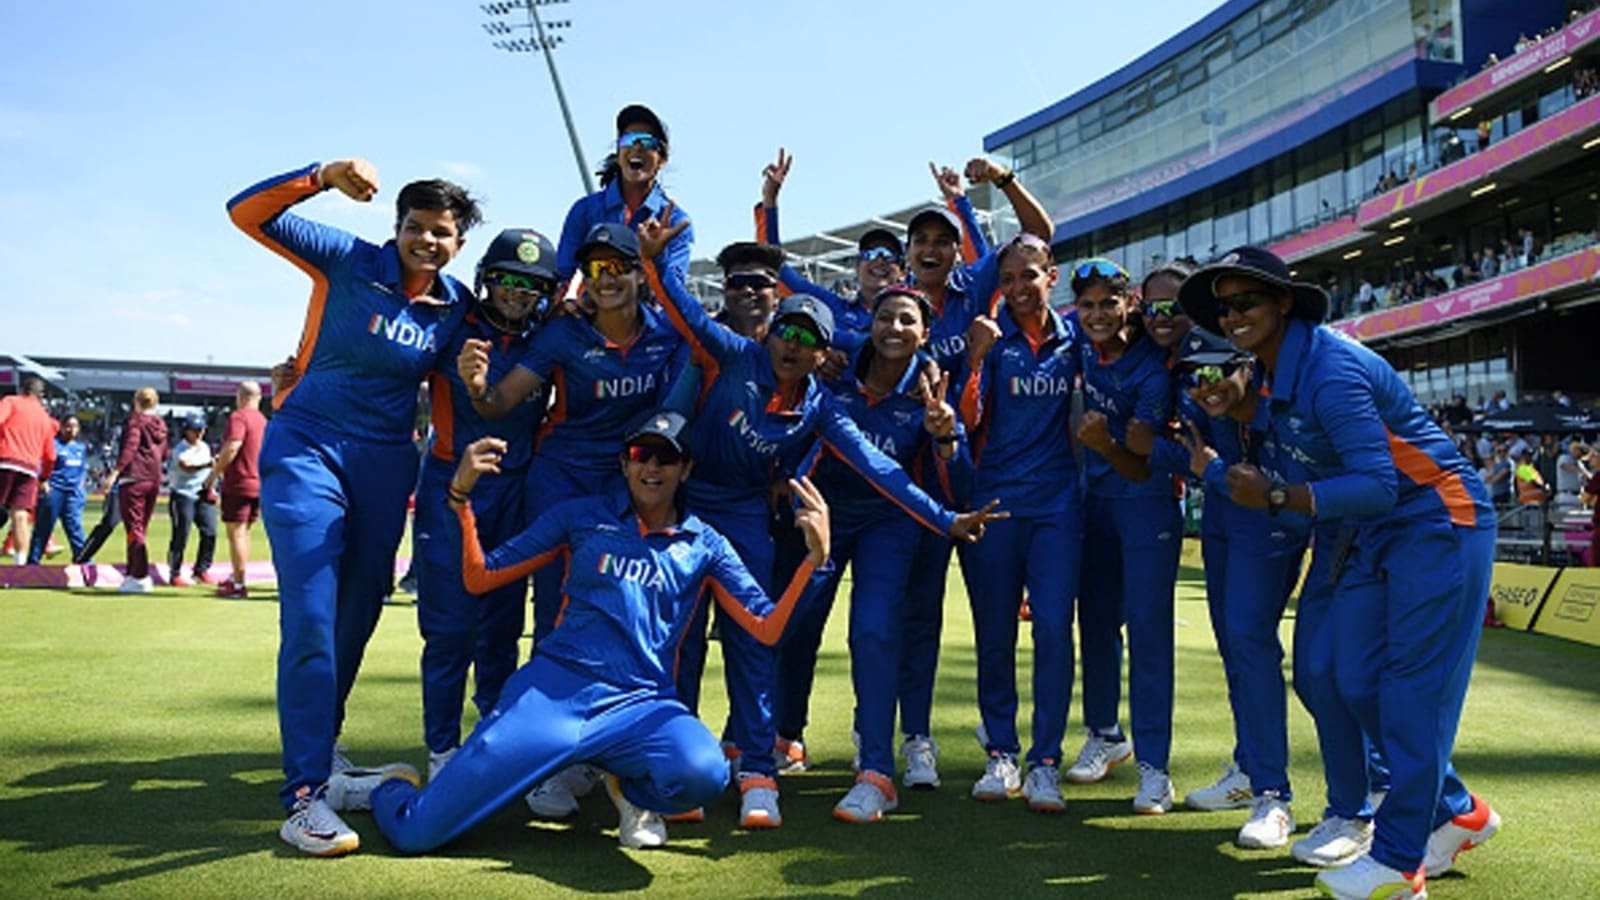 India women's cricket team reaches Commonwealth Games 2022 final, to play for gold after beating England in thriller